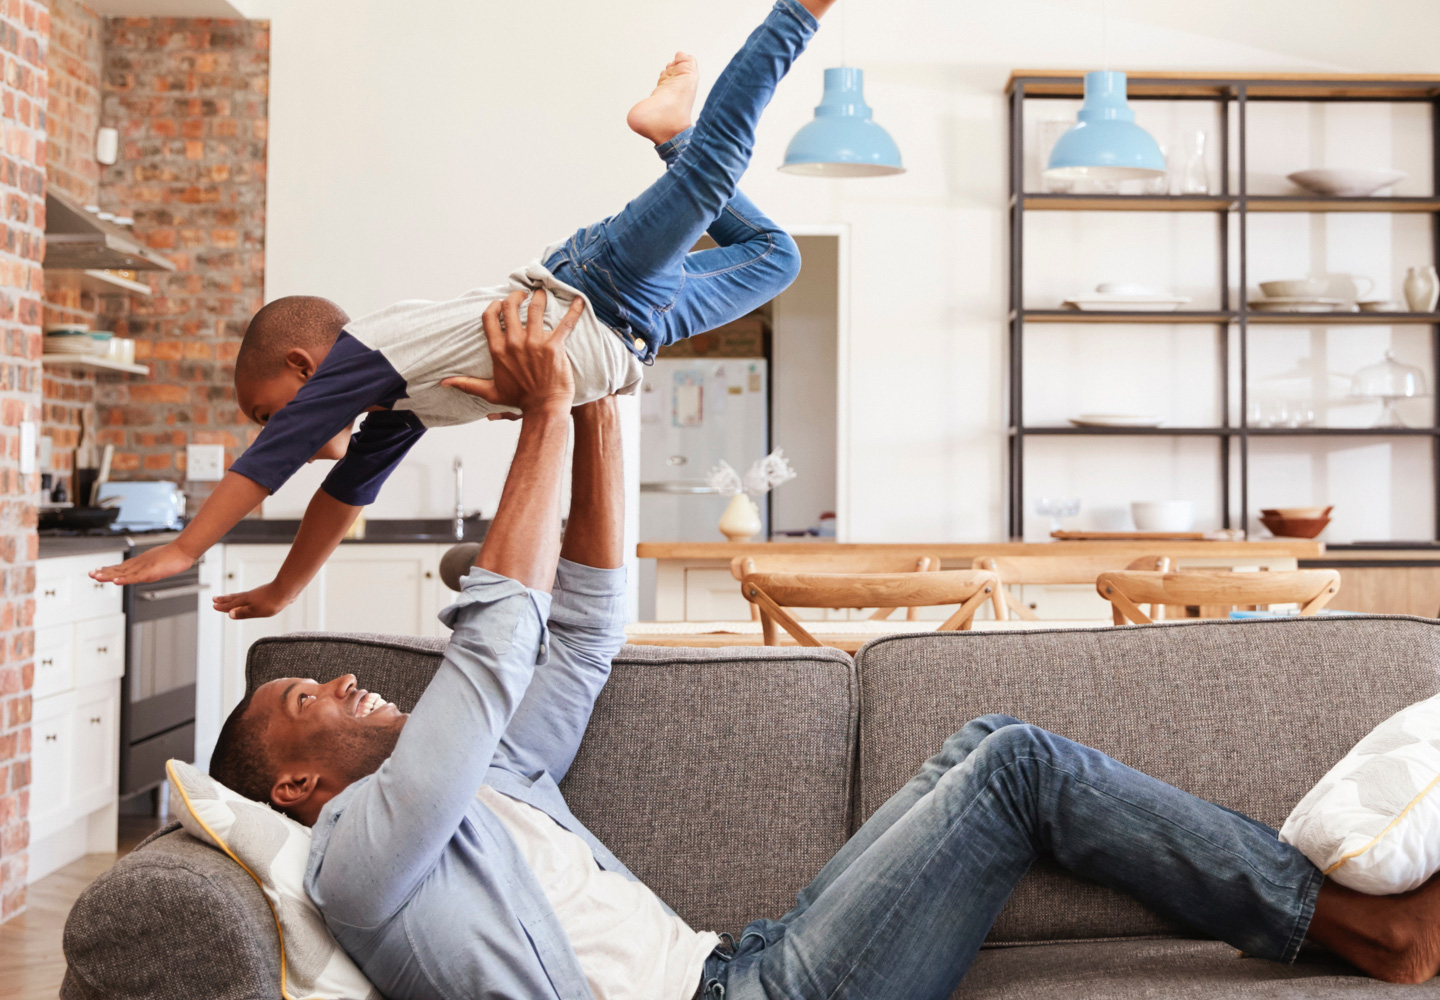 A father laying on the couch holding his son up in the air above him